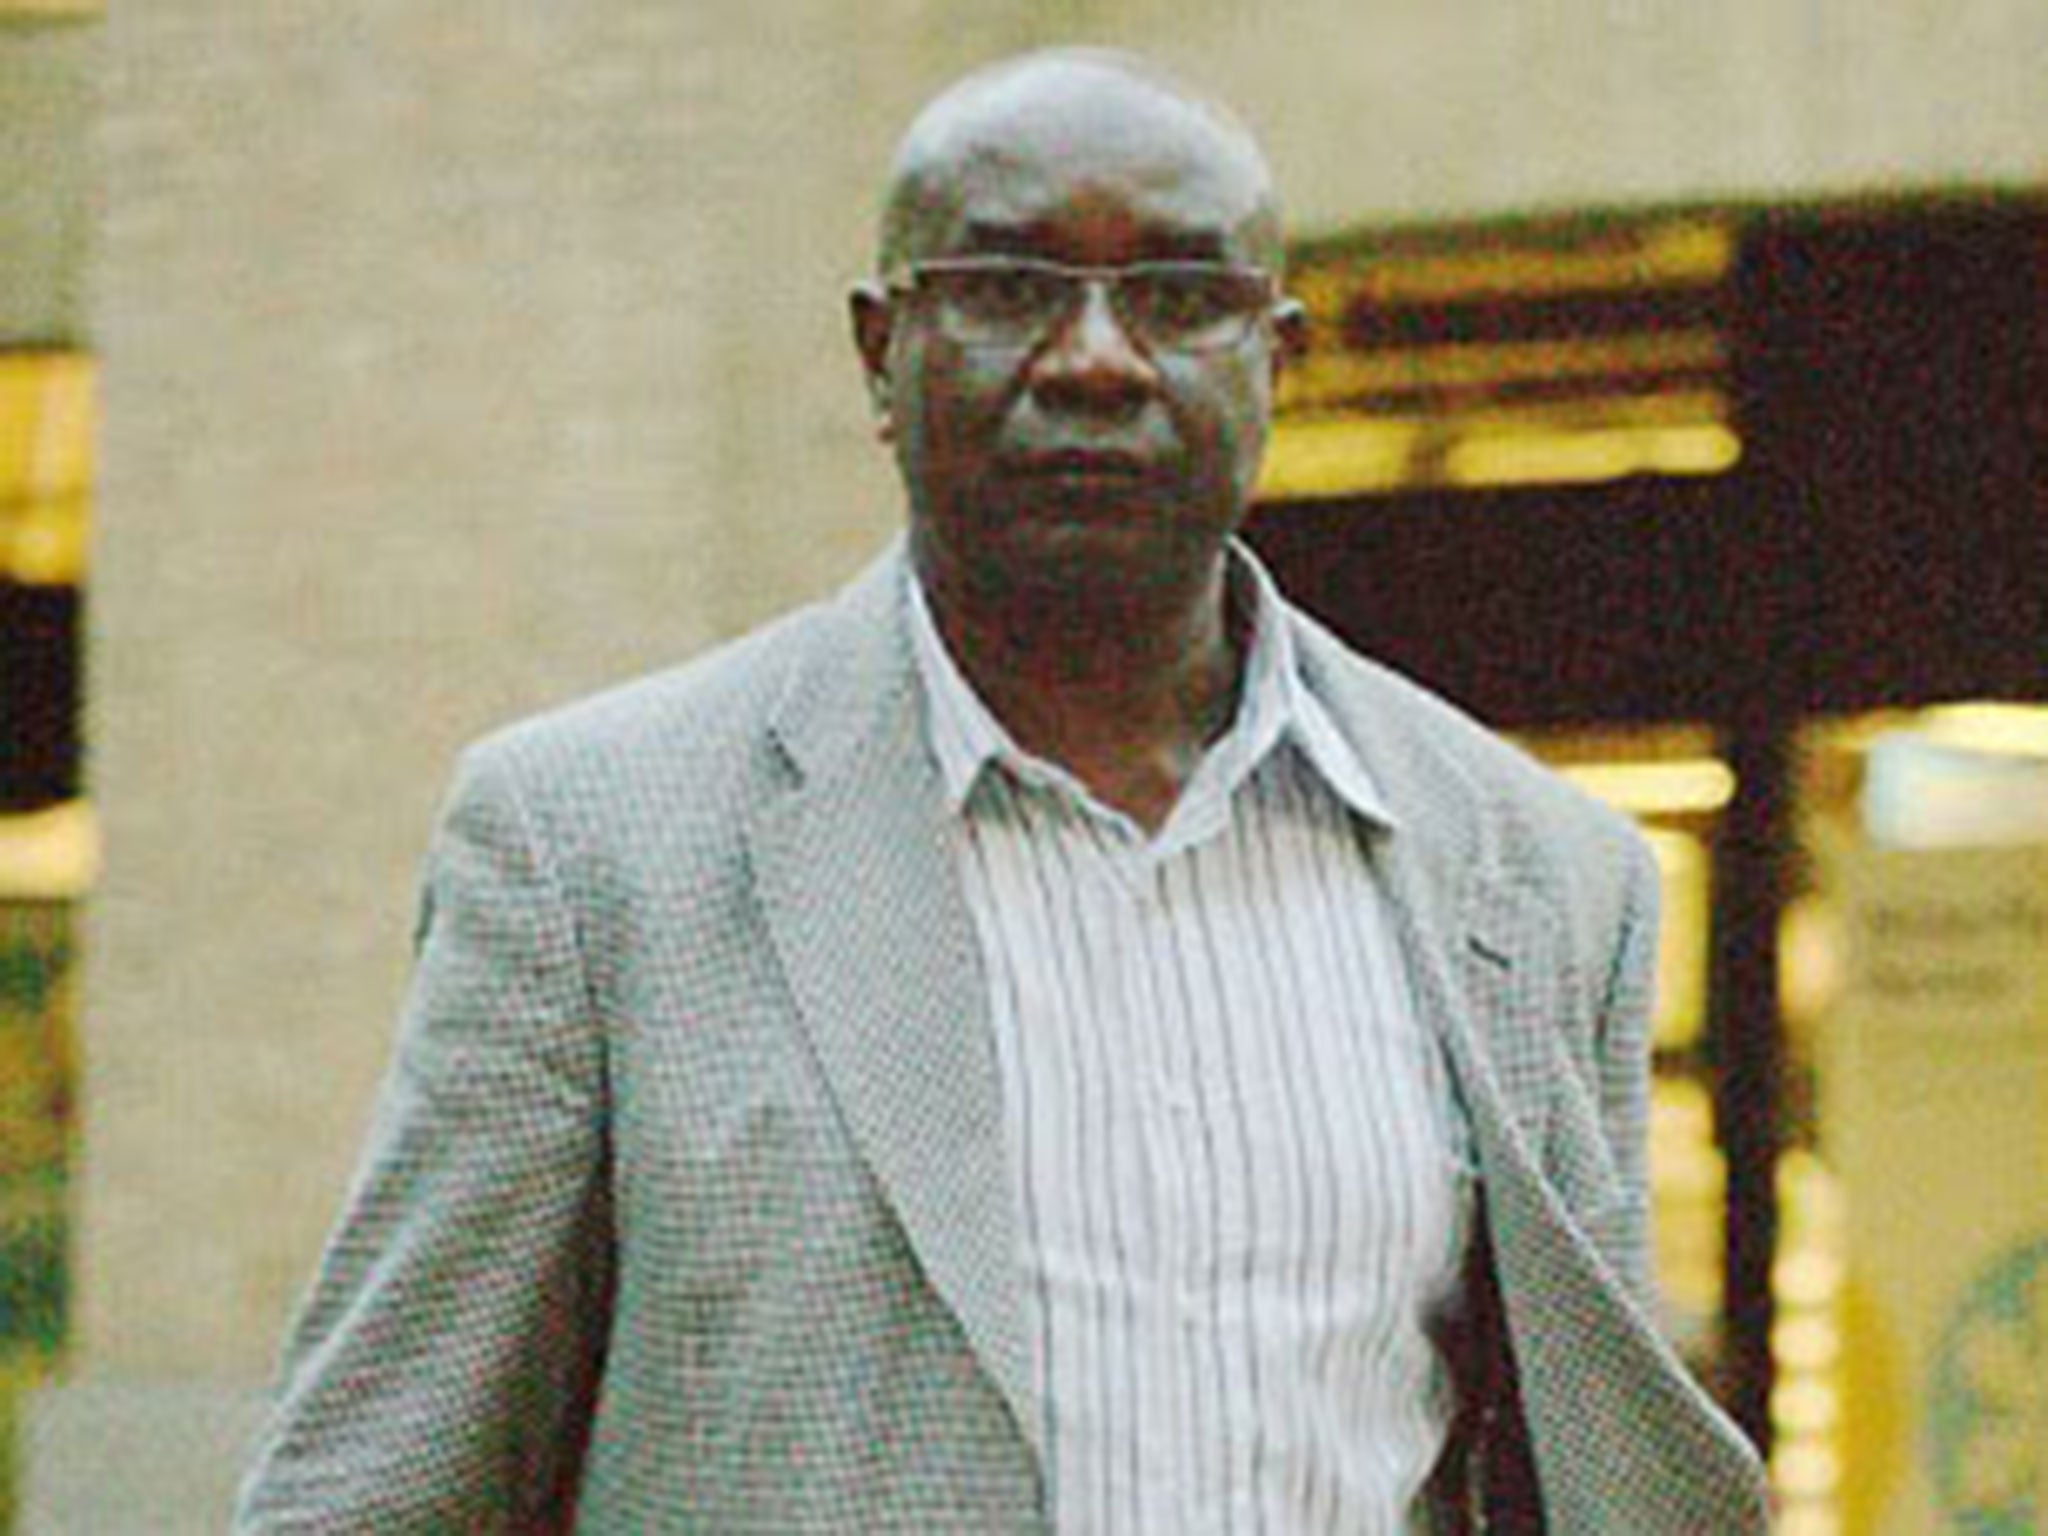 Deputy head of the mission, Yusupha Bojang was found guilty of fraud